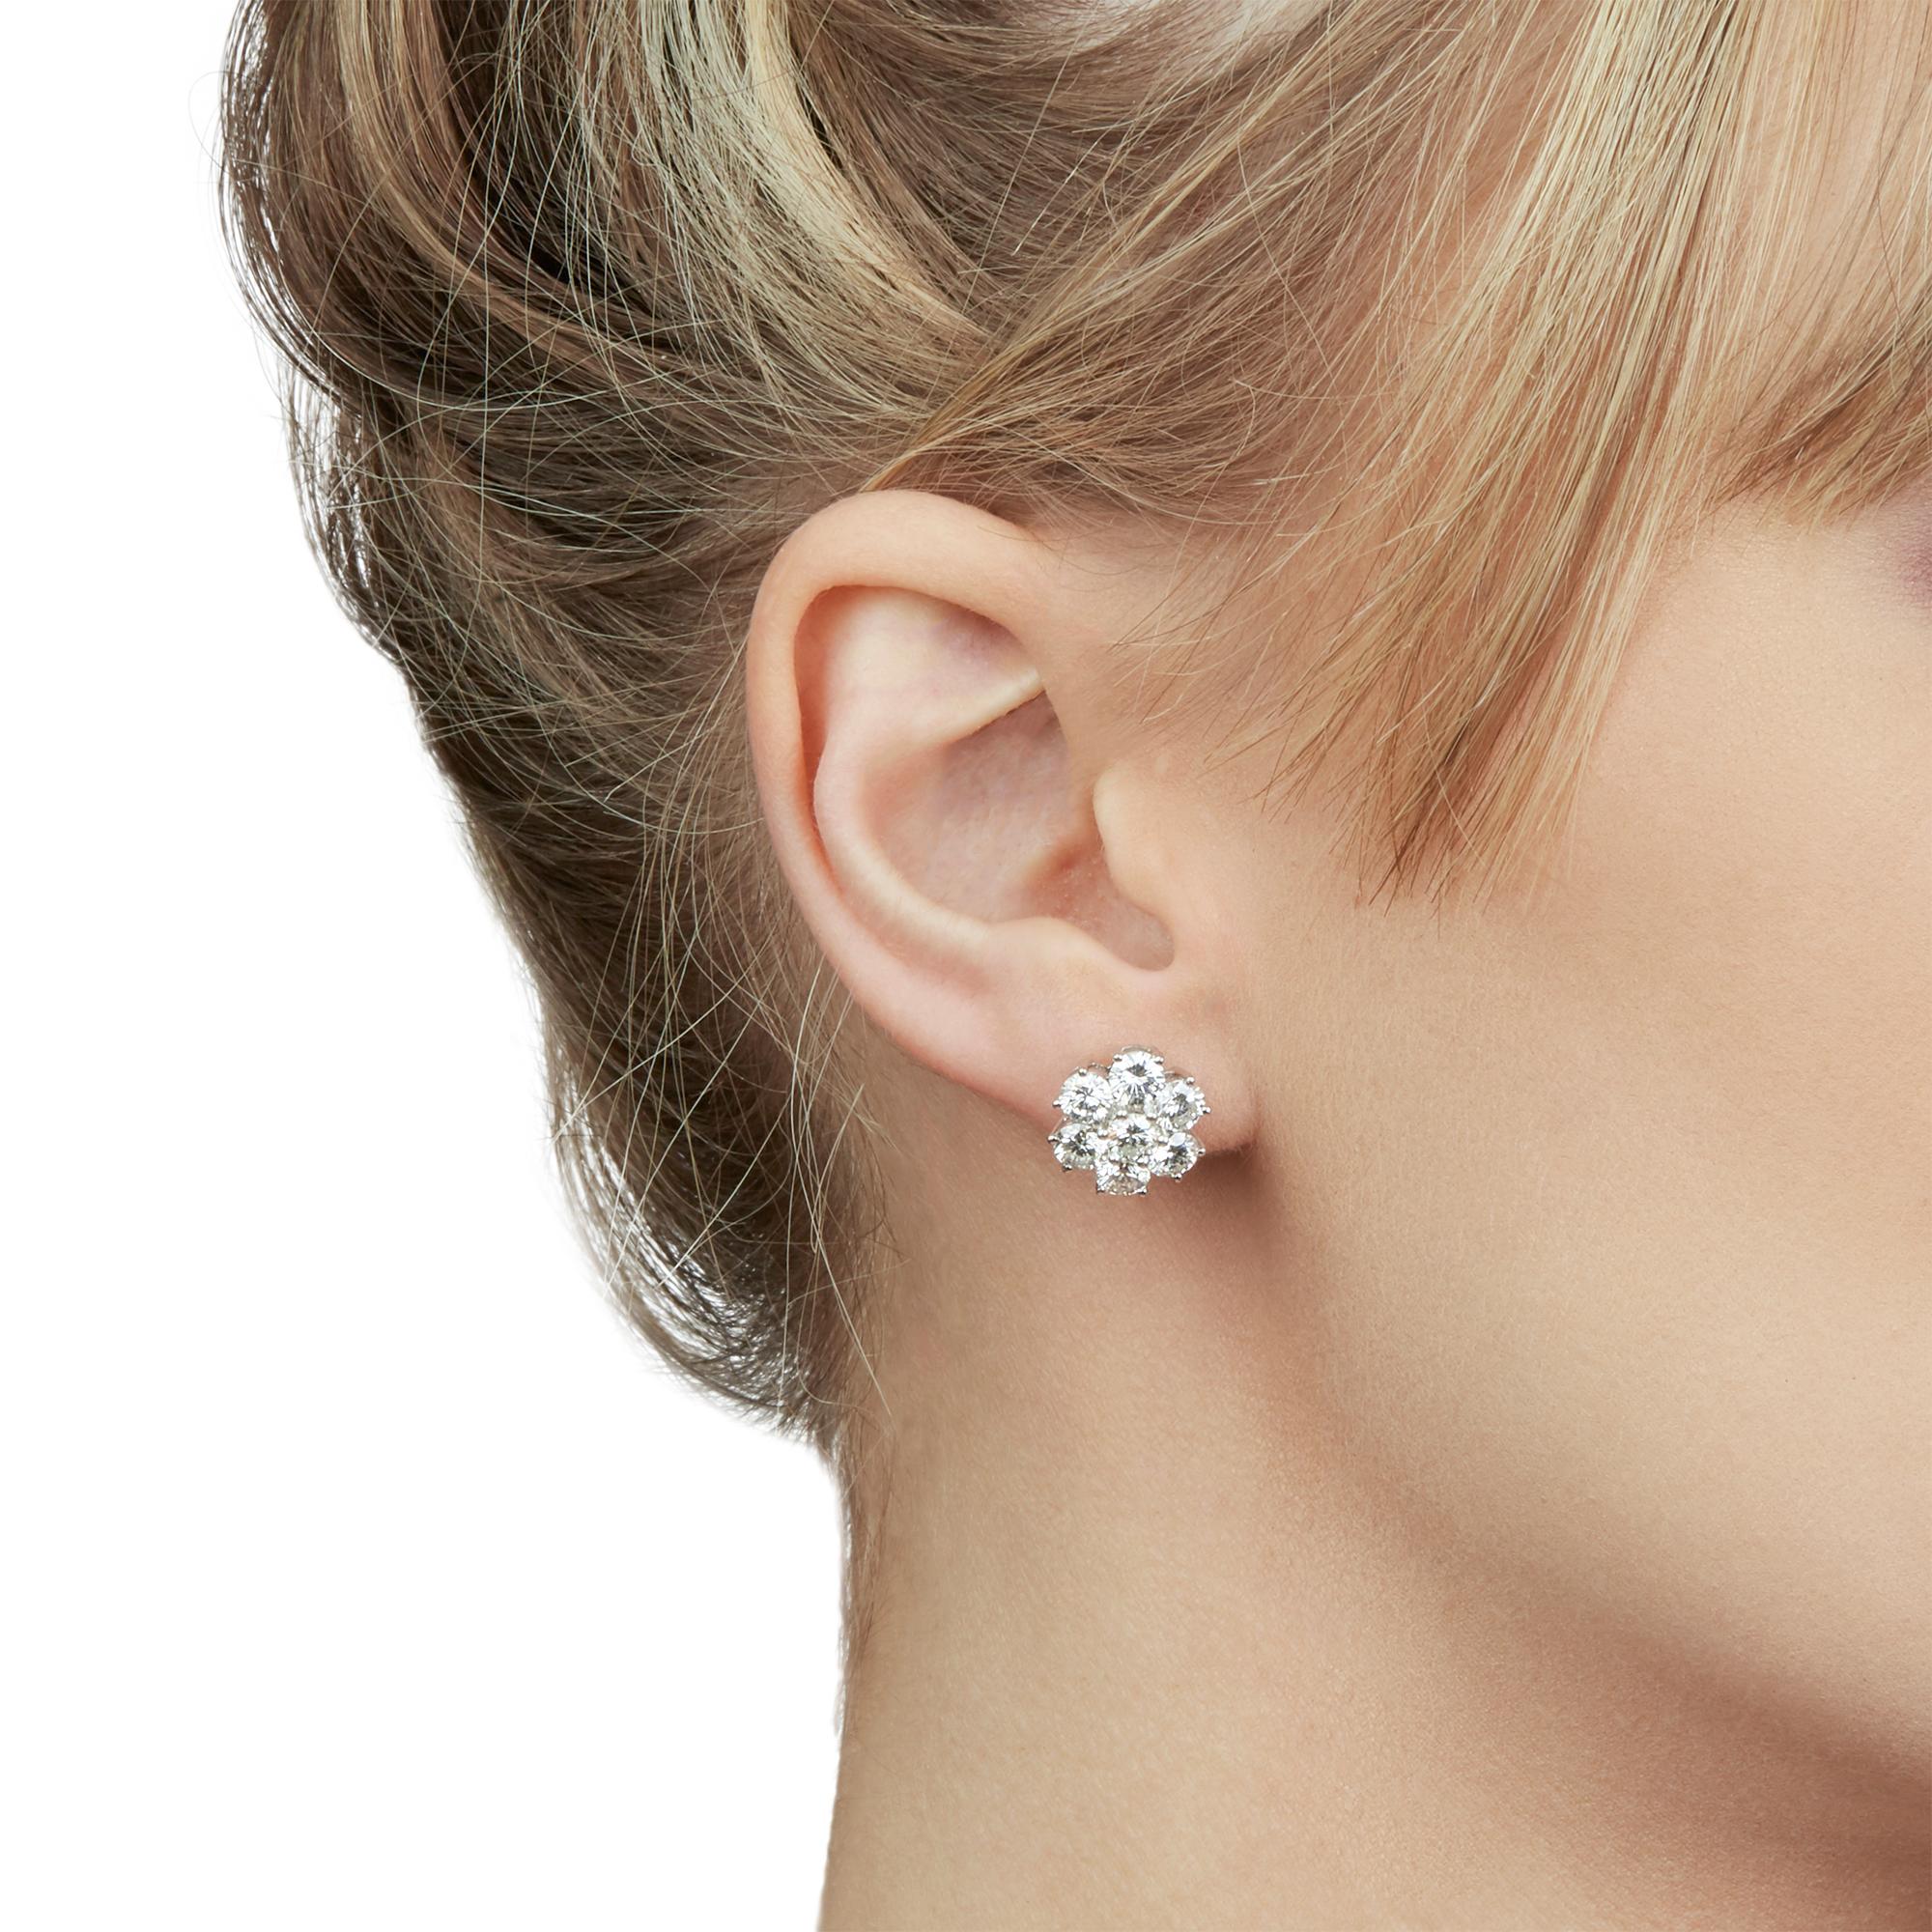 These Earrings by Boodles feature 14 round brilliant cut Diamonds of 4.20ct total colour G, clarity SI, made in 18k White Gold. These Earrings are suitable for pierced ears and have friction backs. Complete with Xupes Presentation Box. 

